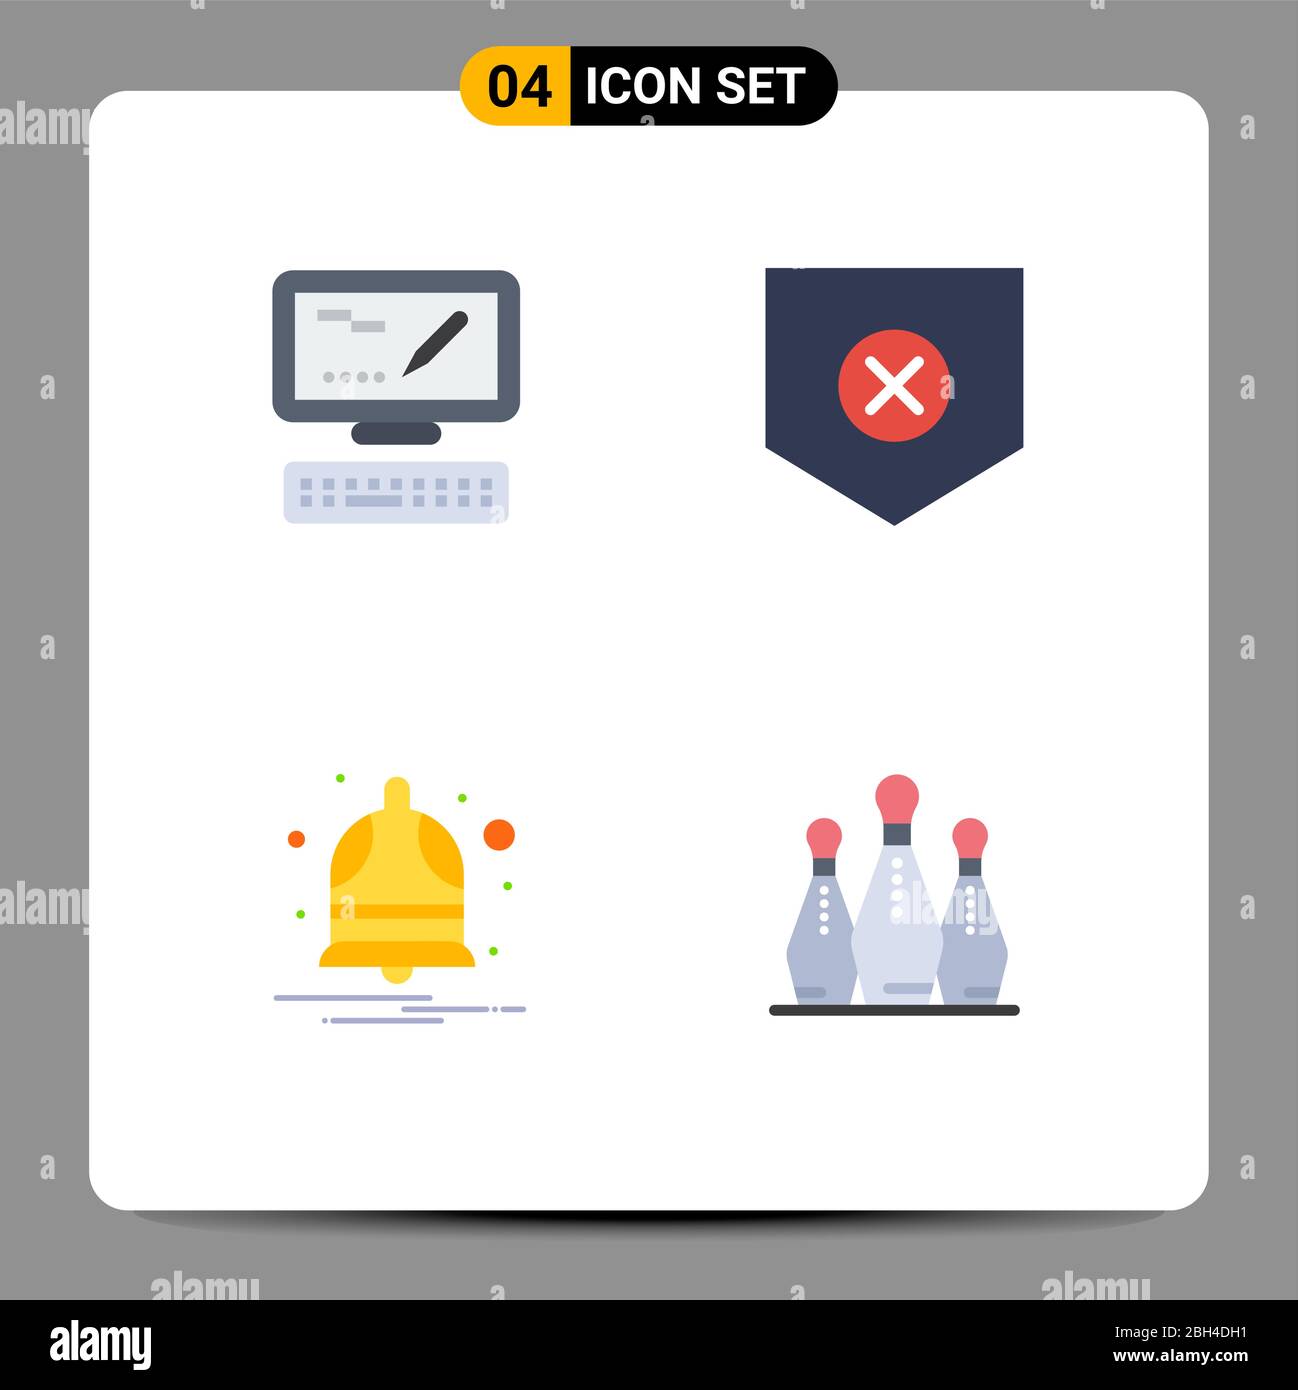 Board games sign icon 2-4 players symbol Vector Image